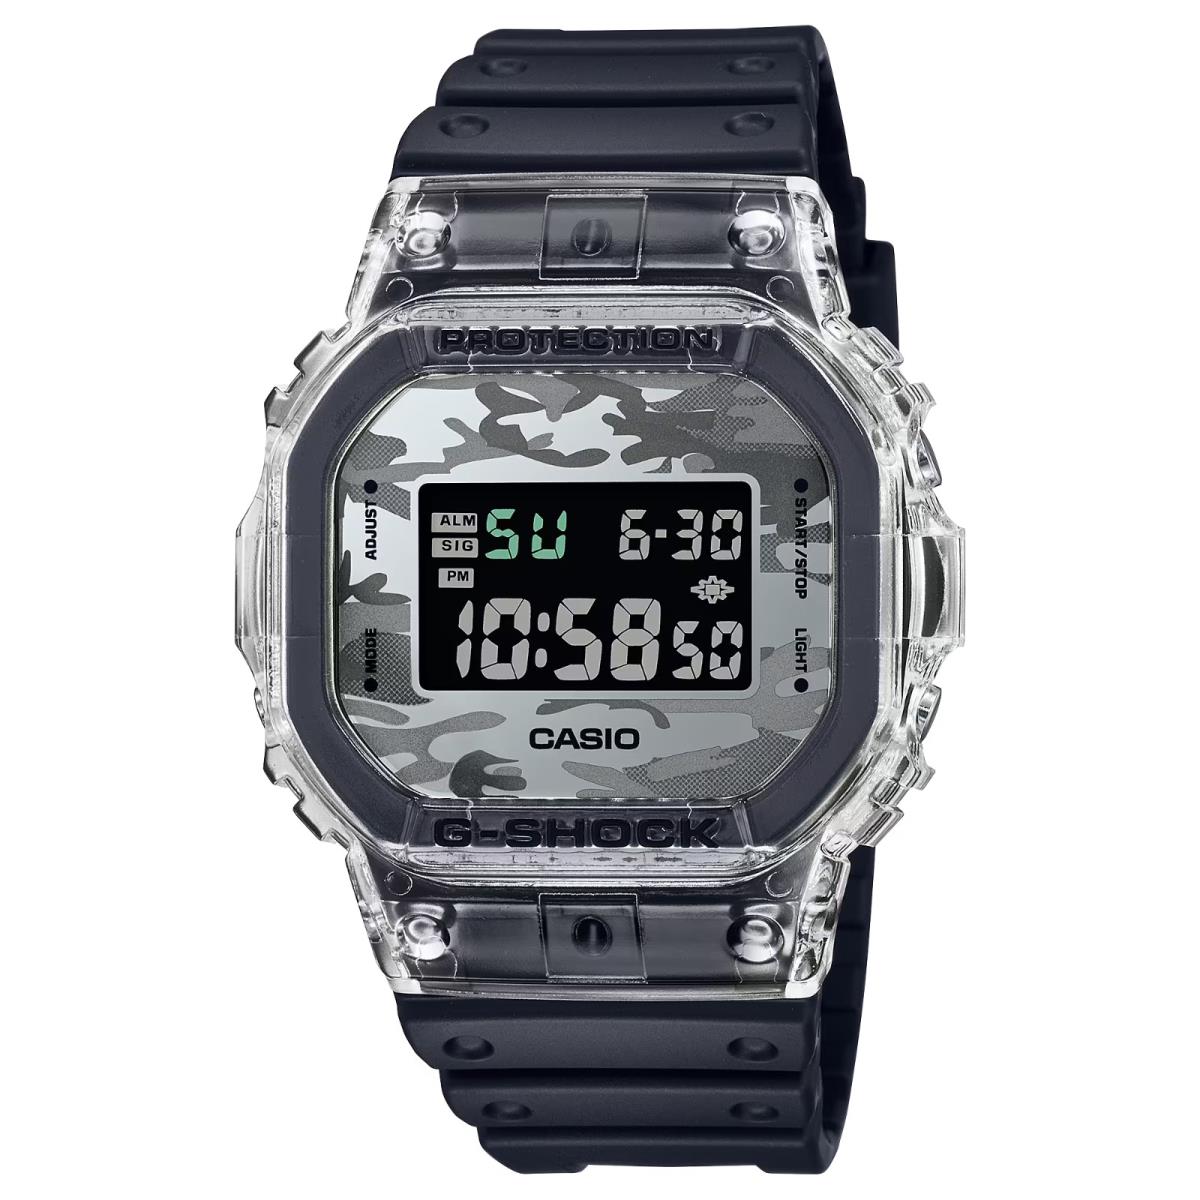 Casio G-shock Gray Dial and Black Resin Band Men`s Watch DW5600SKC-1 - Dial: Gray, Band: Black